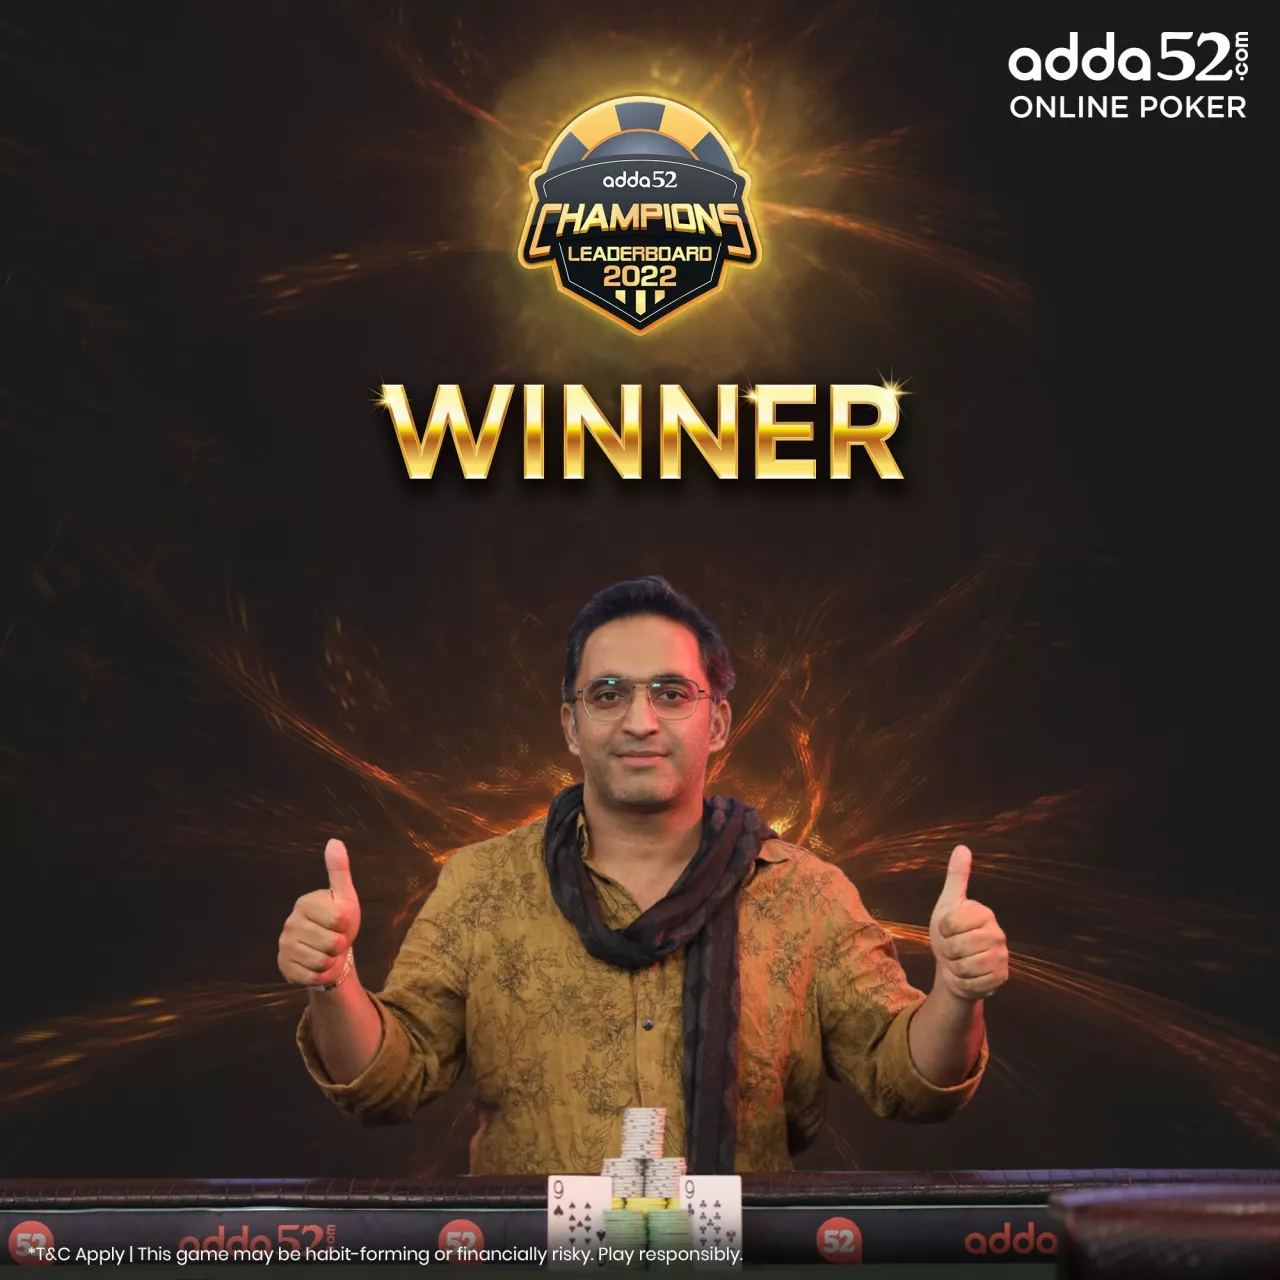 Adda52 Concluded its Biggest Poker Championship - ACL 2.0, Ram Kakkar Emerges as the Winner